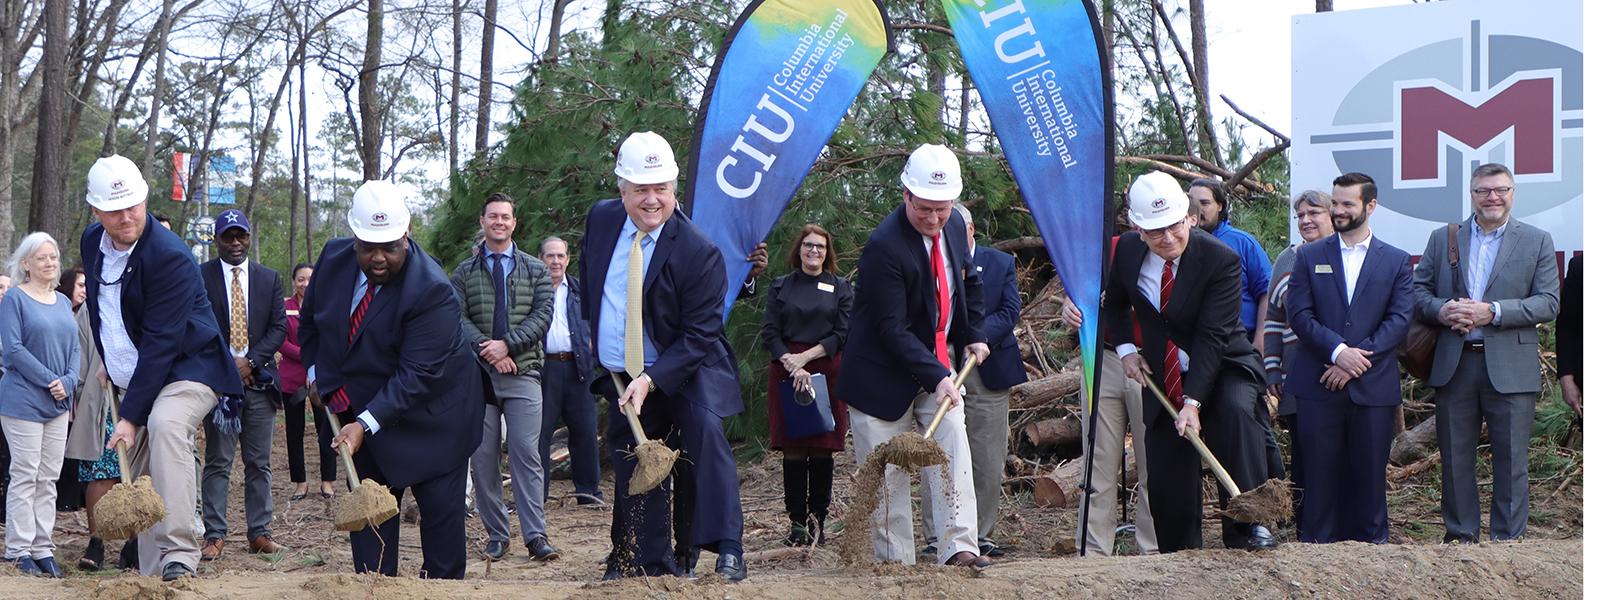 CIU administrators and a representative of Mashburn Construction turn the dirt in the groundbreaking ceremony. (Photos by Kierston Smith) 